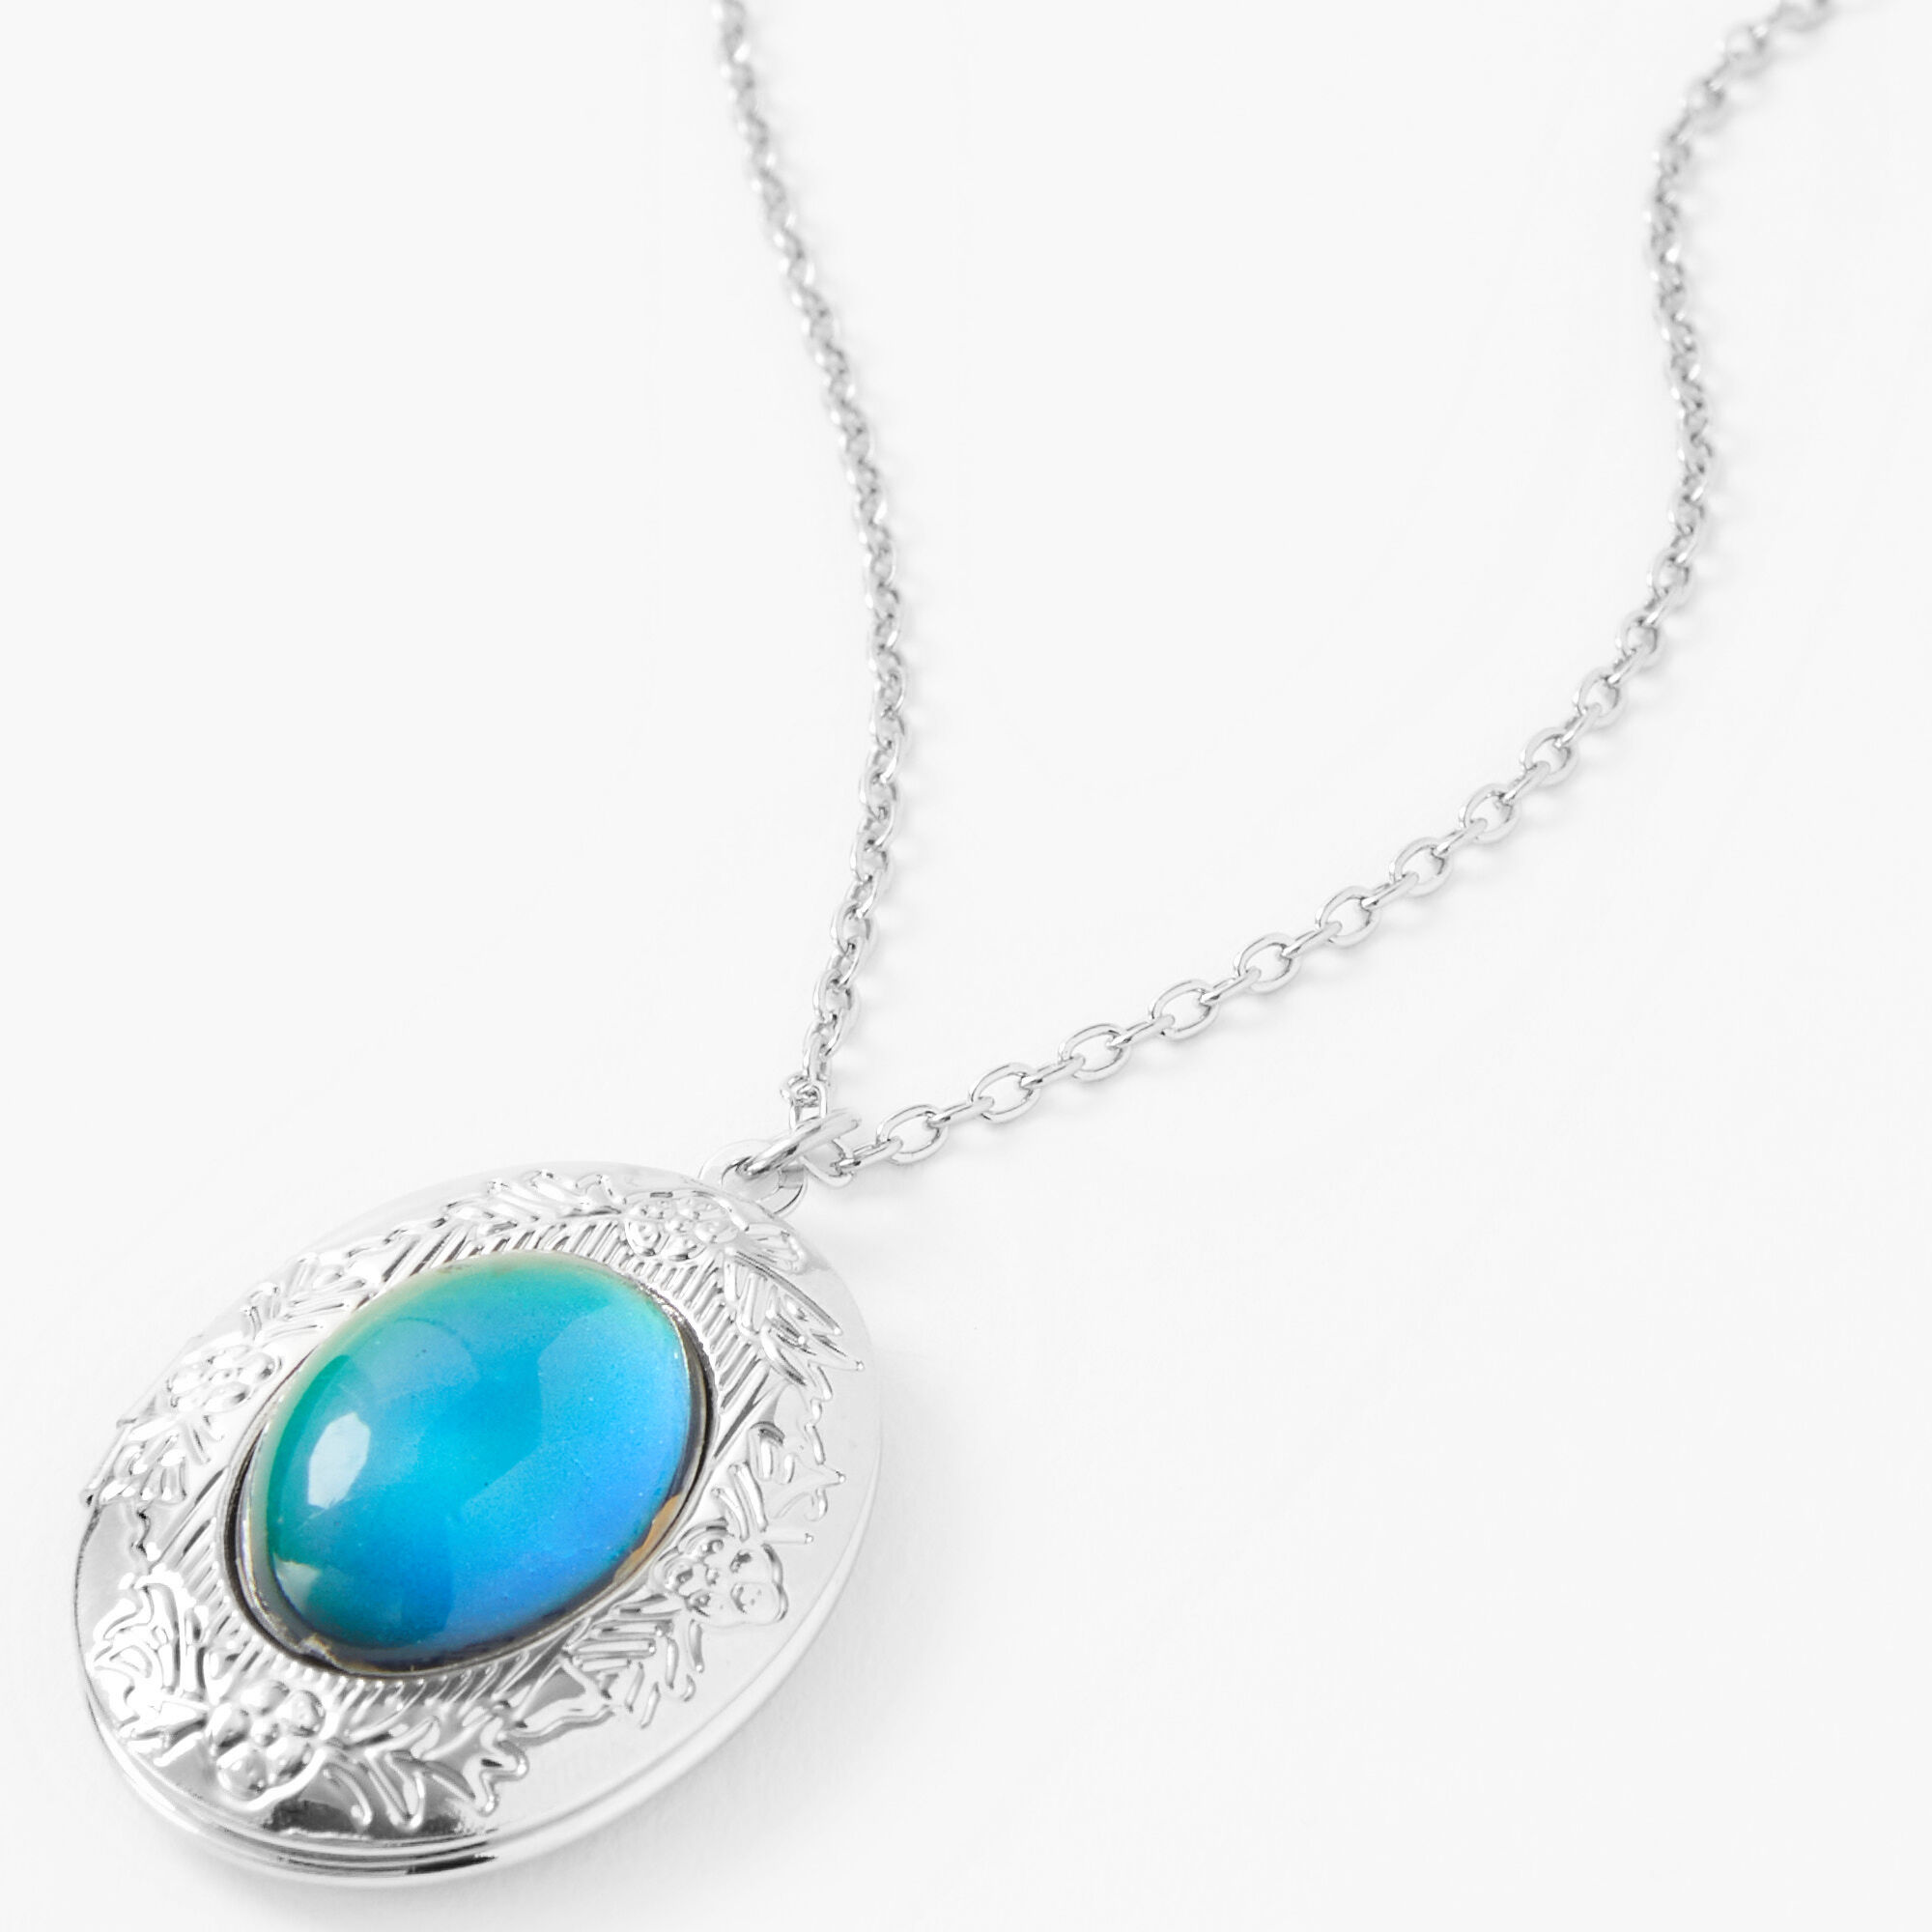 Changing Color Mood Stone Necklace Cute Necklace Mood – LB Diamond Store